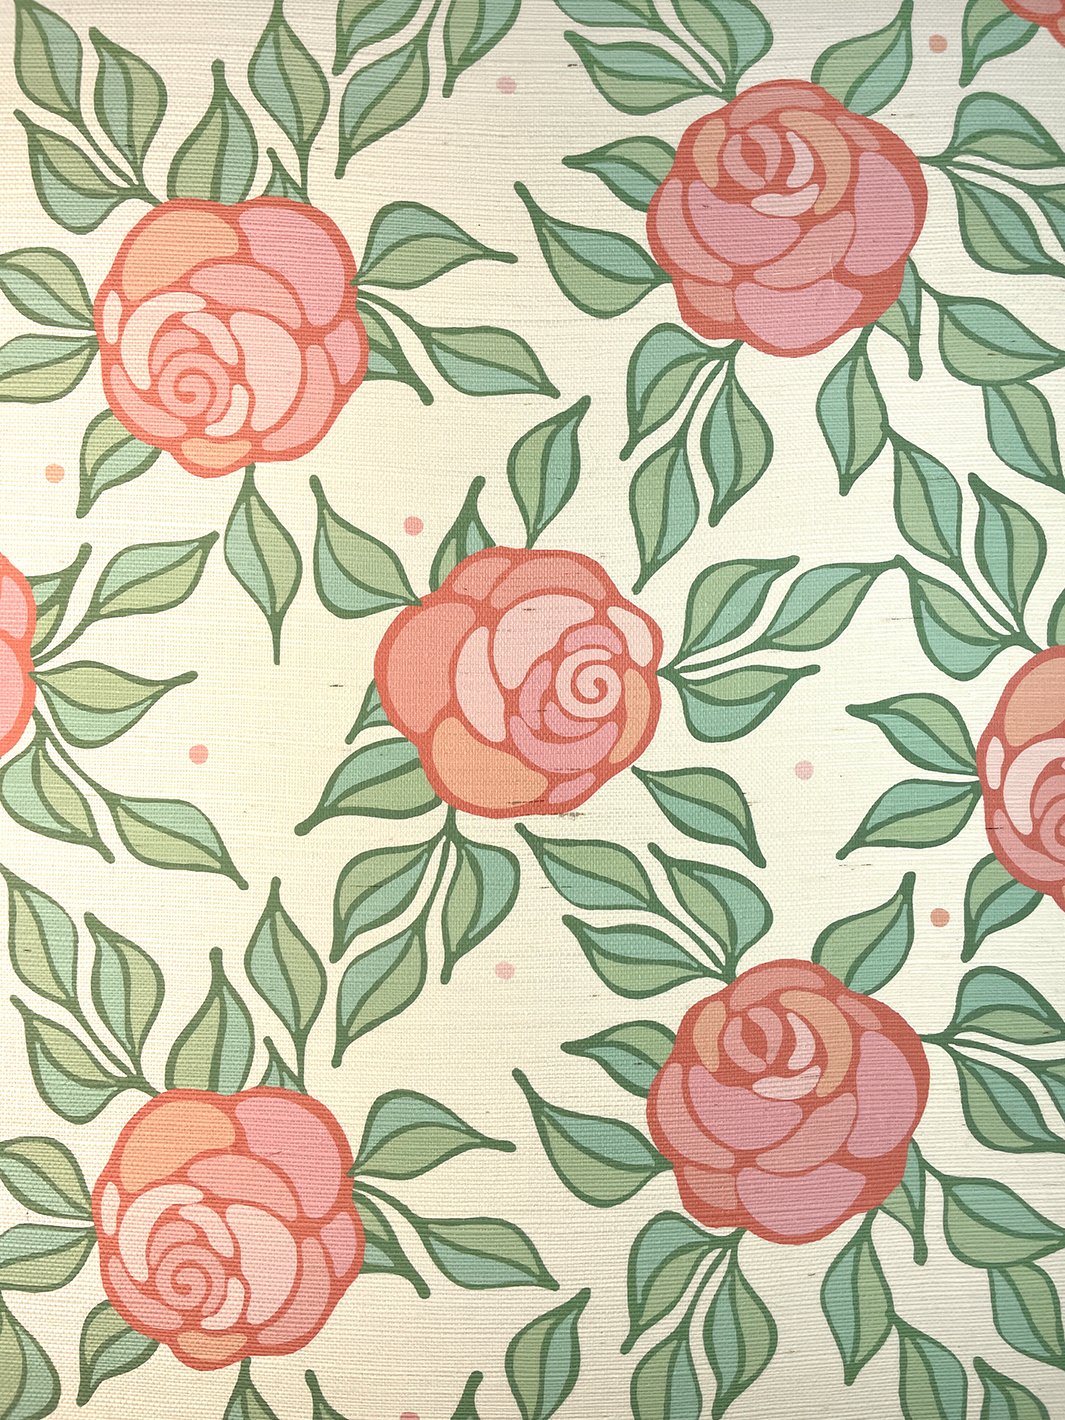 'Groovy Floral' Grasscloth' Wallpaper by Barbie™ - Watermelon